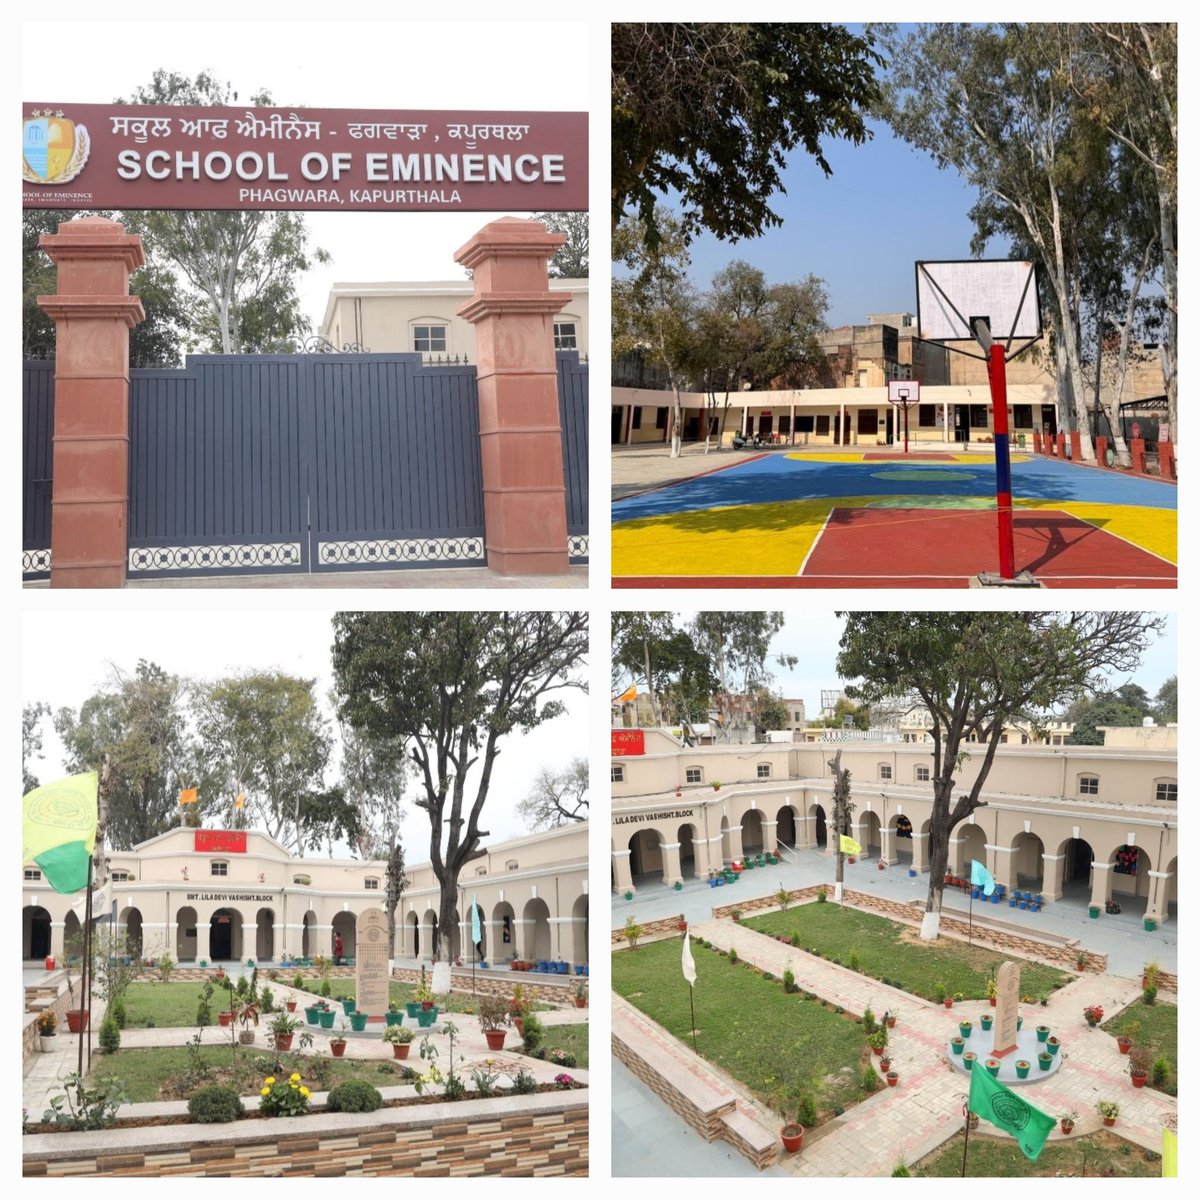 The old school building of Phagwara was Demolished & New 'School of Eminence' was constructed in its place, while preserving the Heritage & Design of the old building.

Entire Reconstruction has Cost Rs 3 Crores. Job well done!

@harjotbains

Before                          After